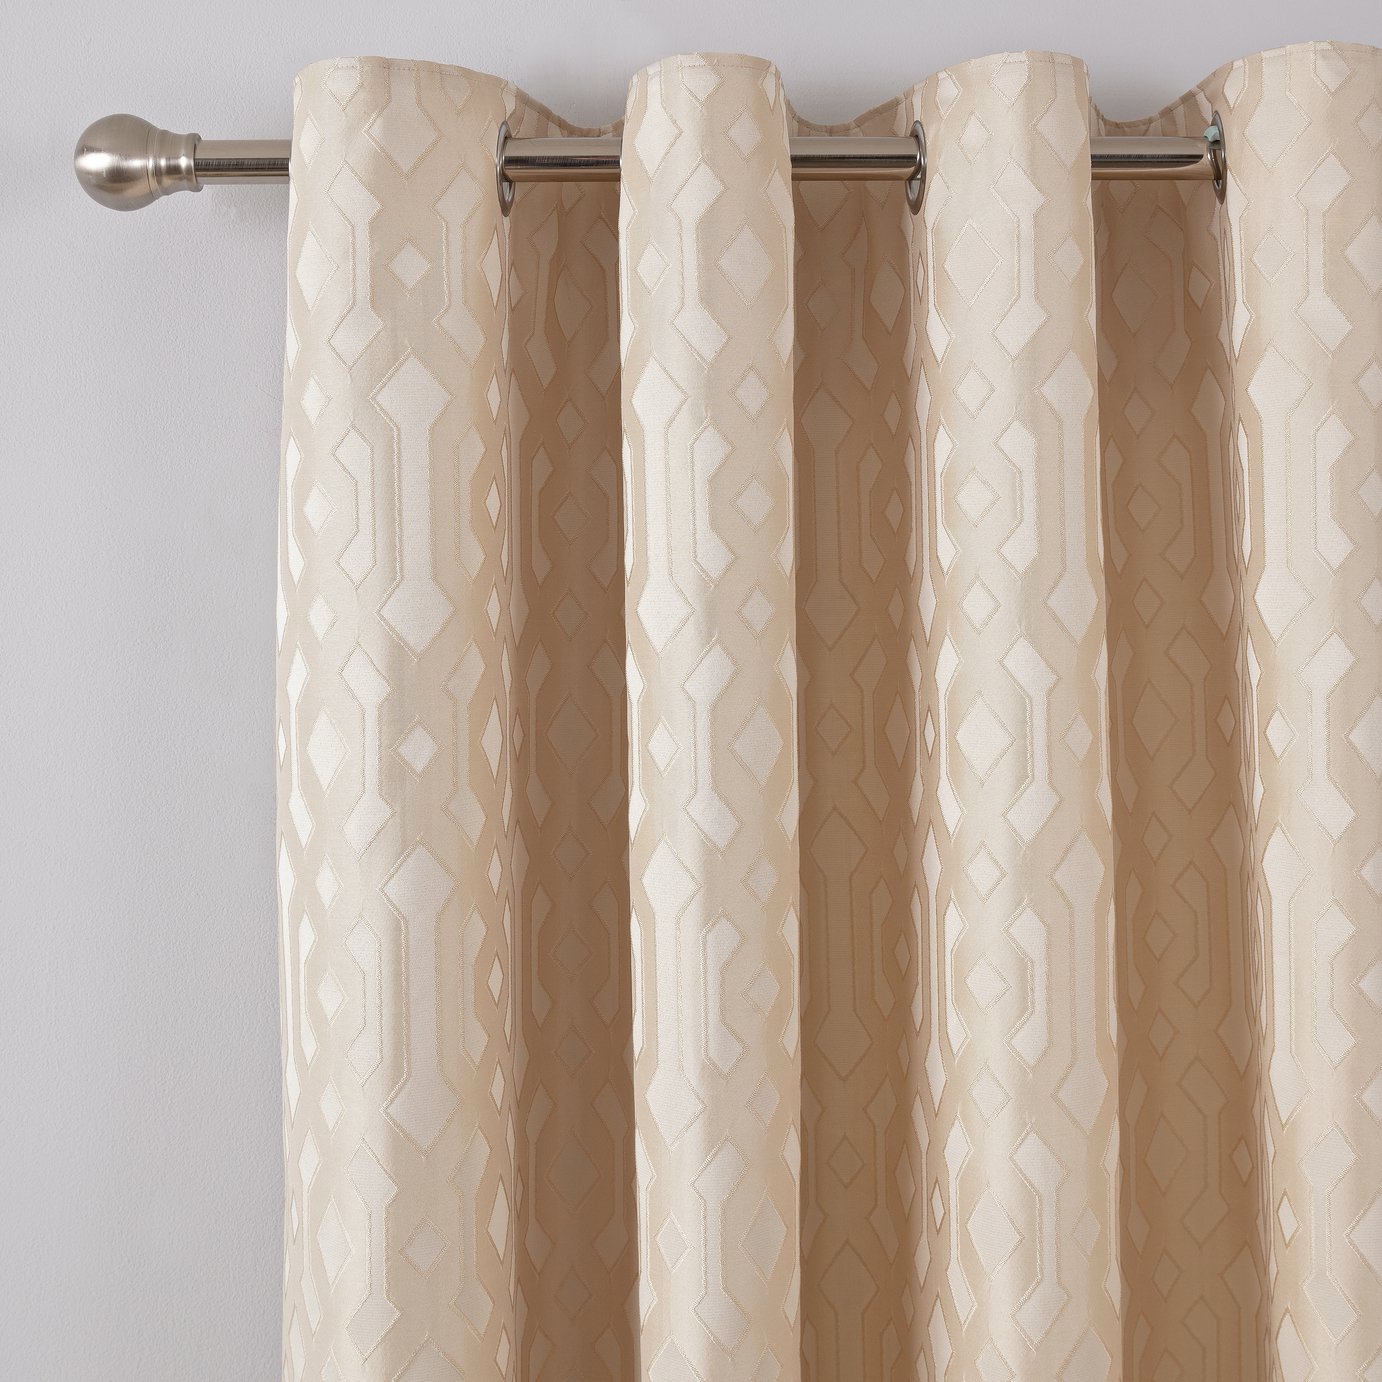 Argos Home Jacquard Geo Lined Eyelet Curtains - Champagne